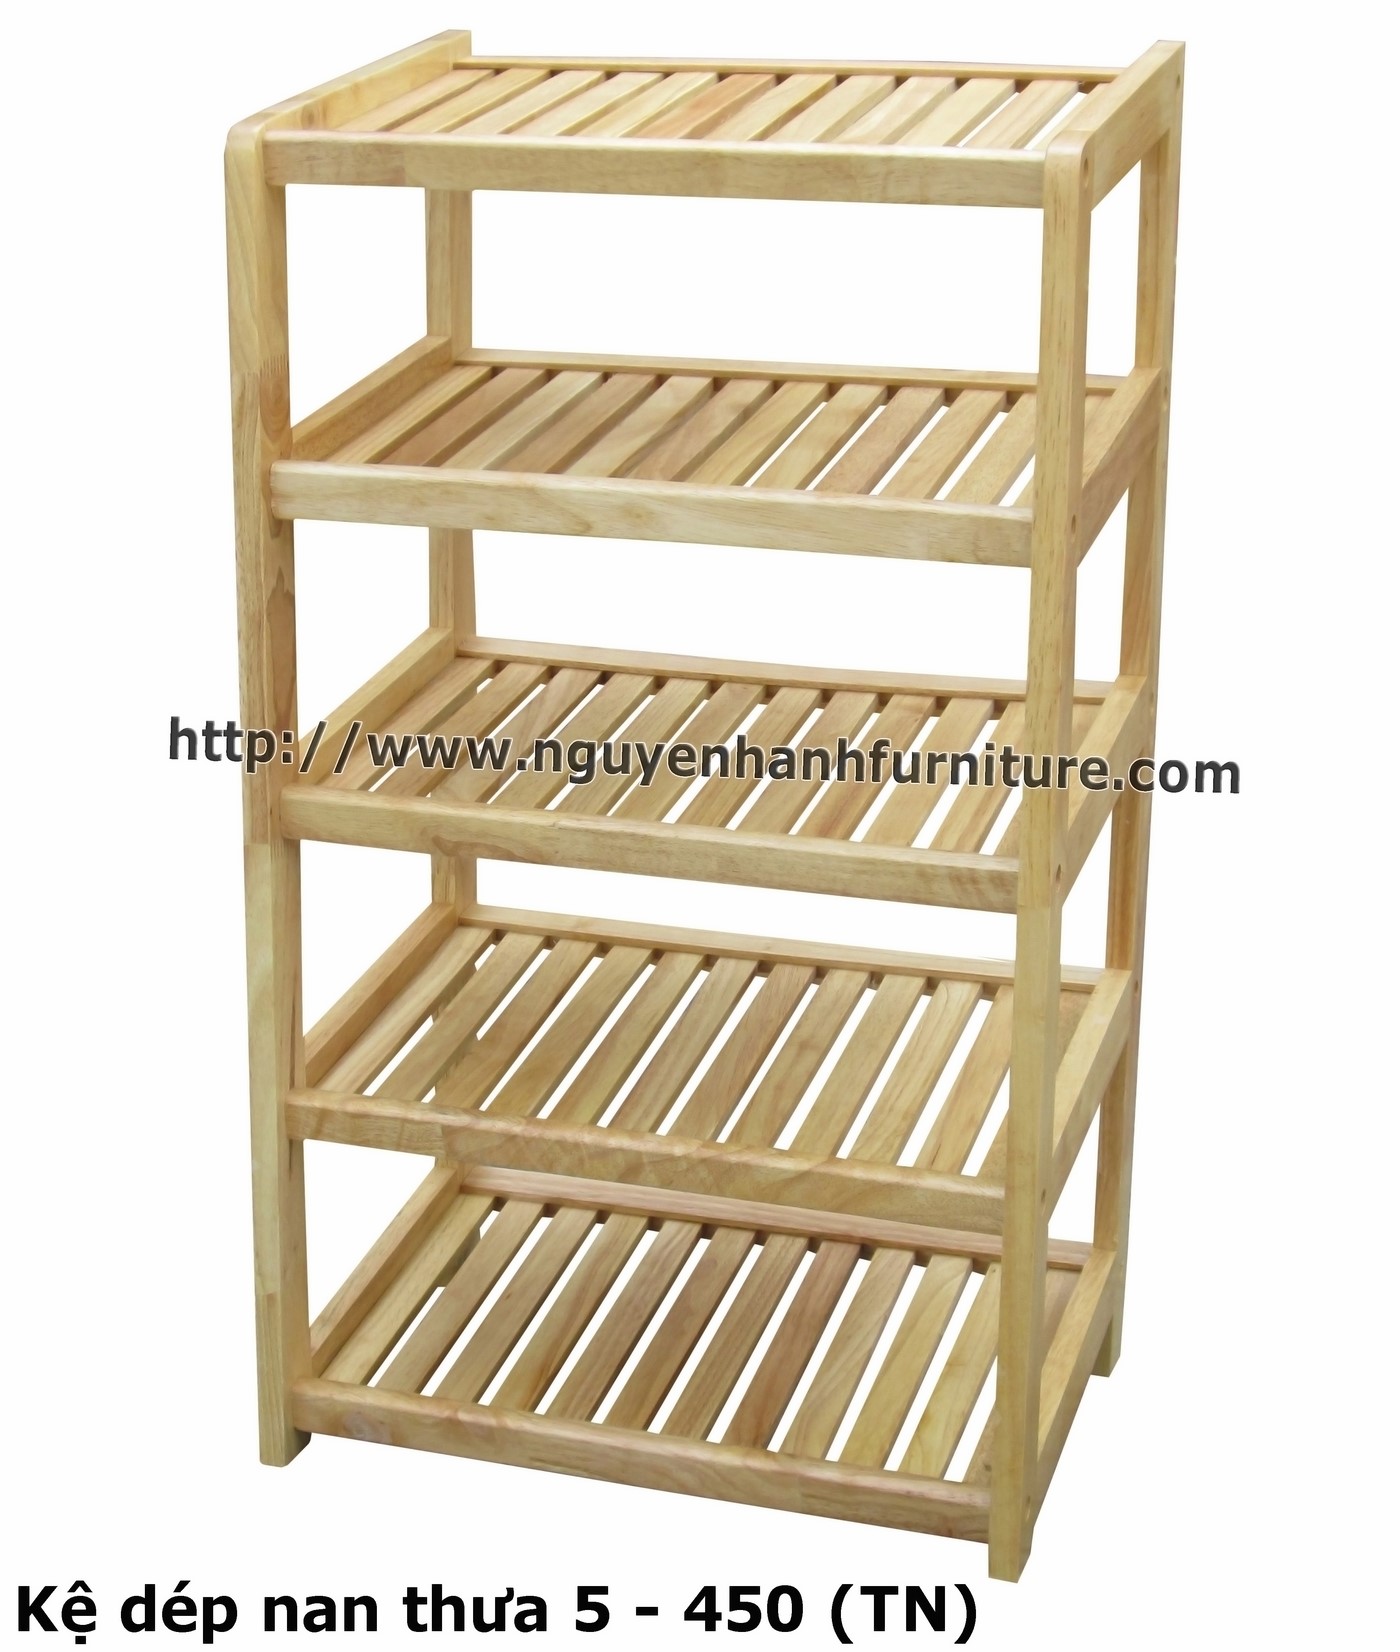 Name product: Shoeshelf 5 Floors 450 with sparse blades (Natural) - Dimensions: 45 x 30 x 82 (H) - Description: Wood natural rubbe